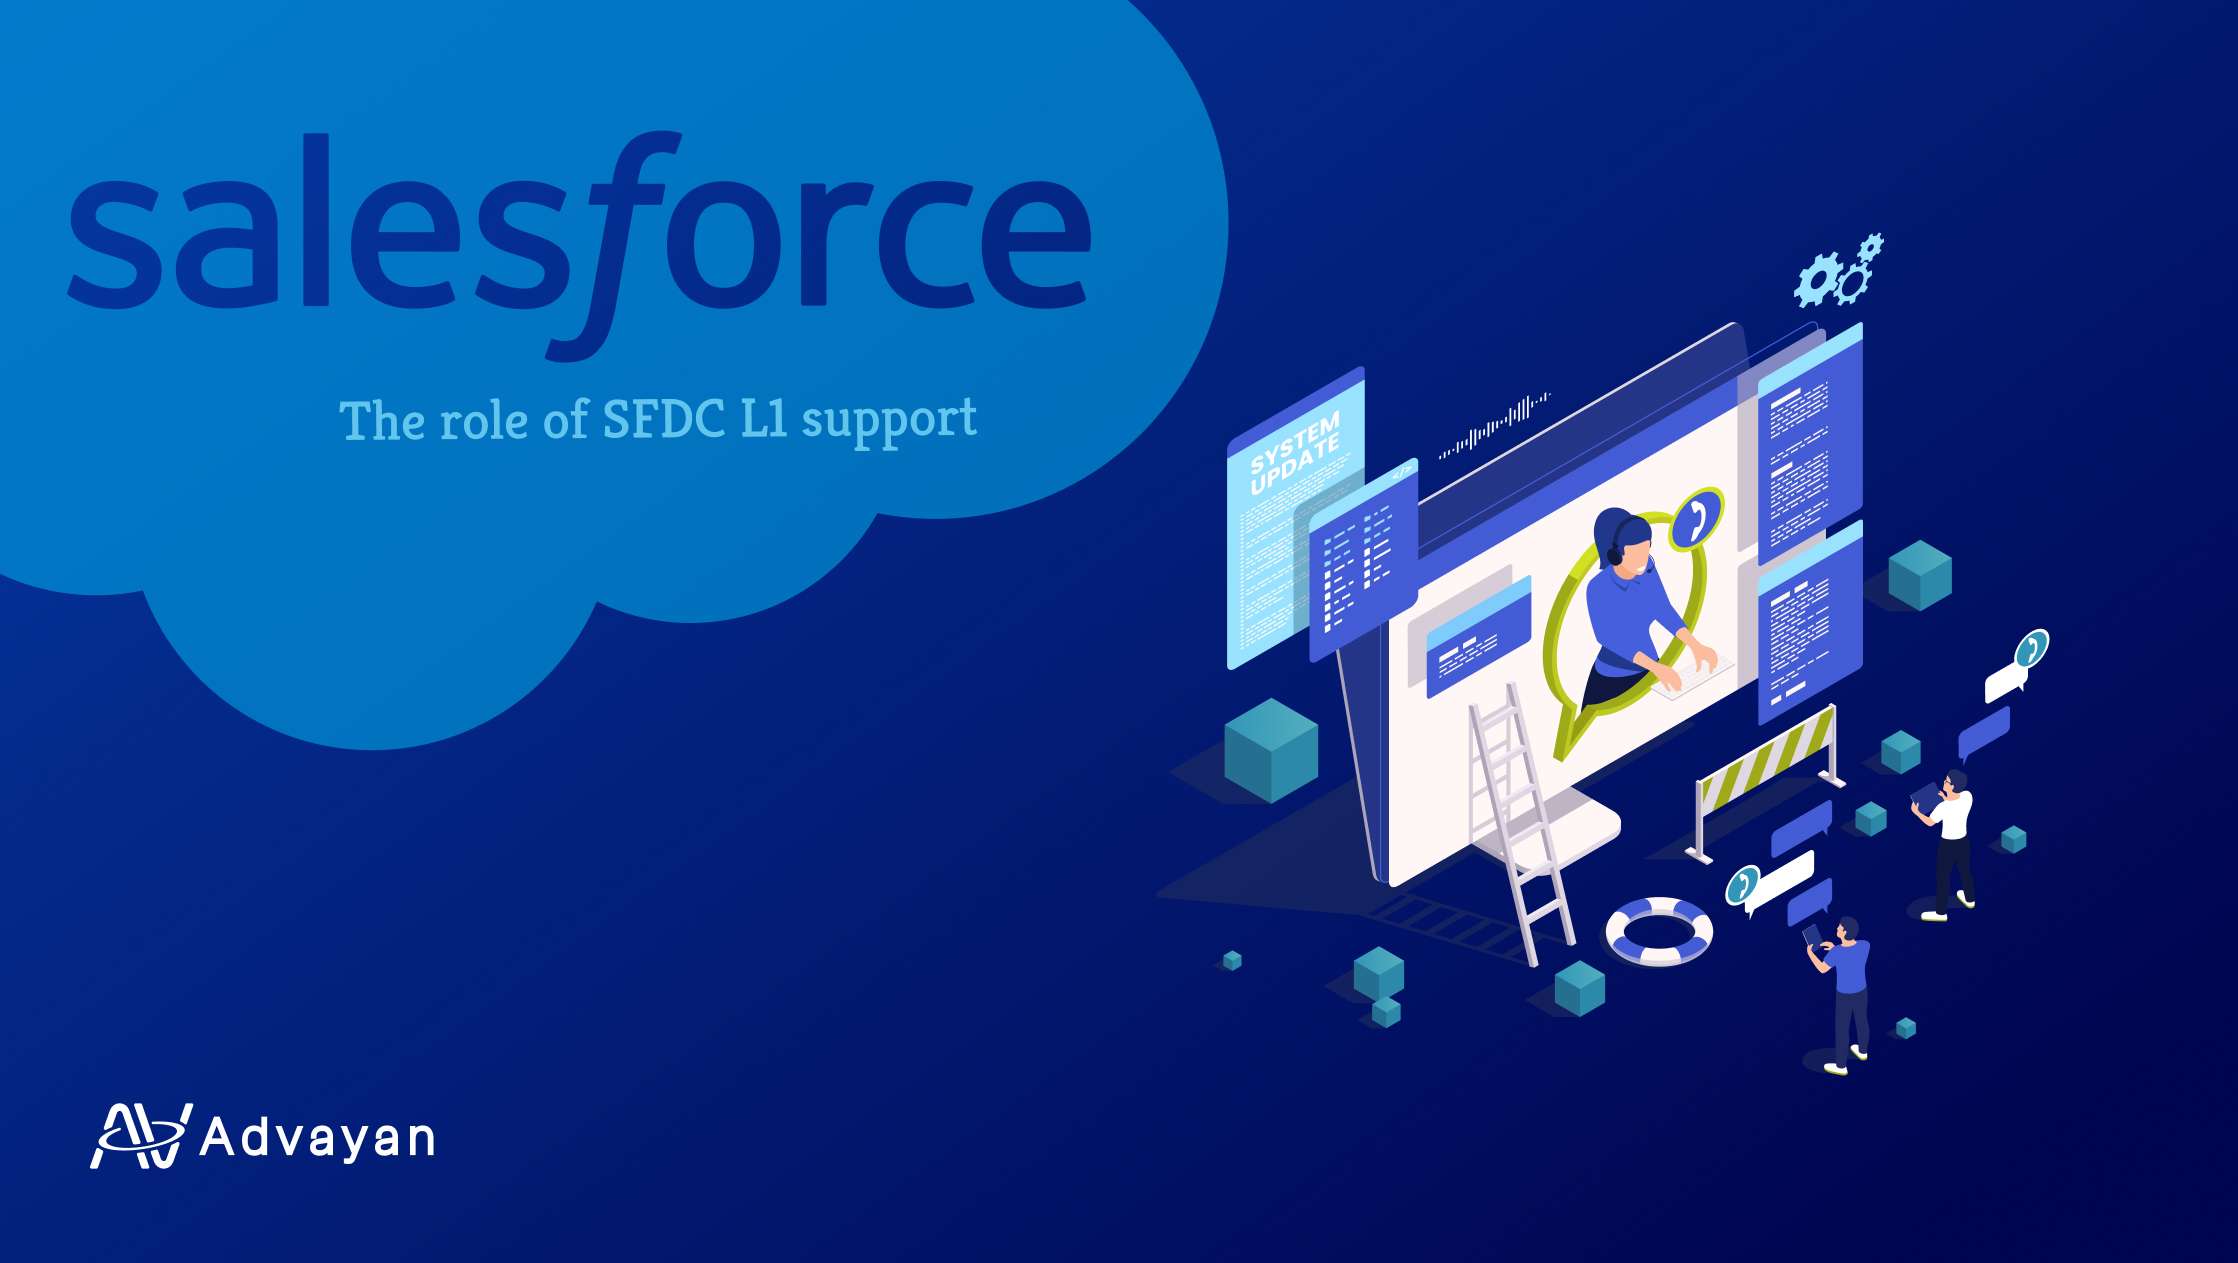 What is the role of SFDC L1 support?